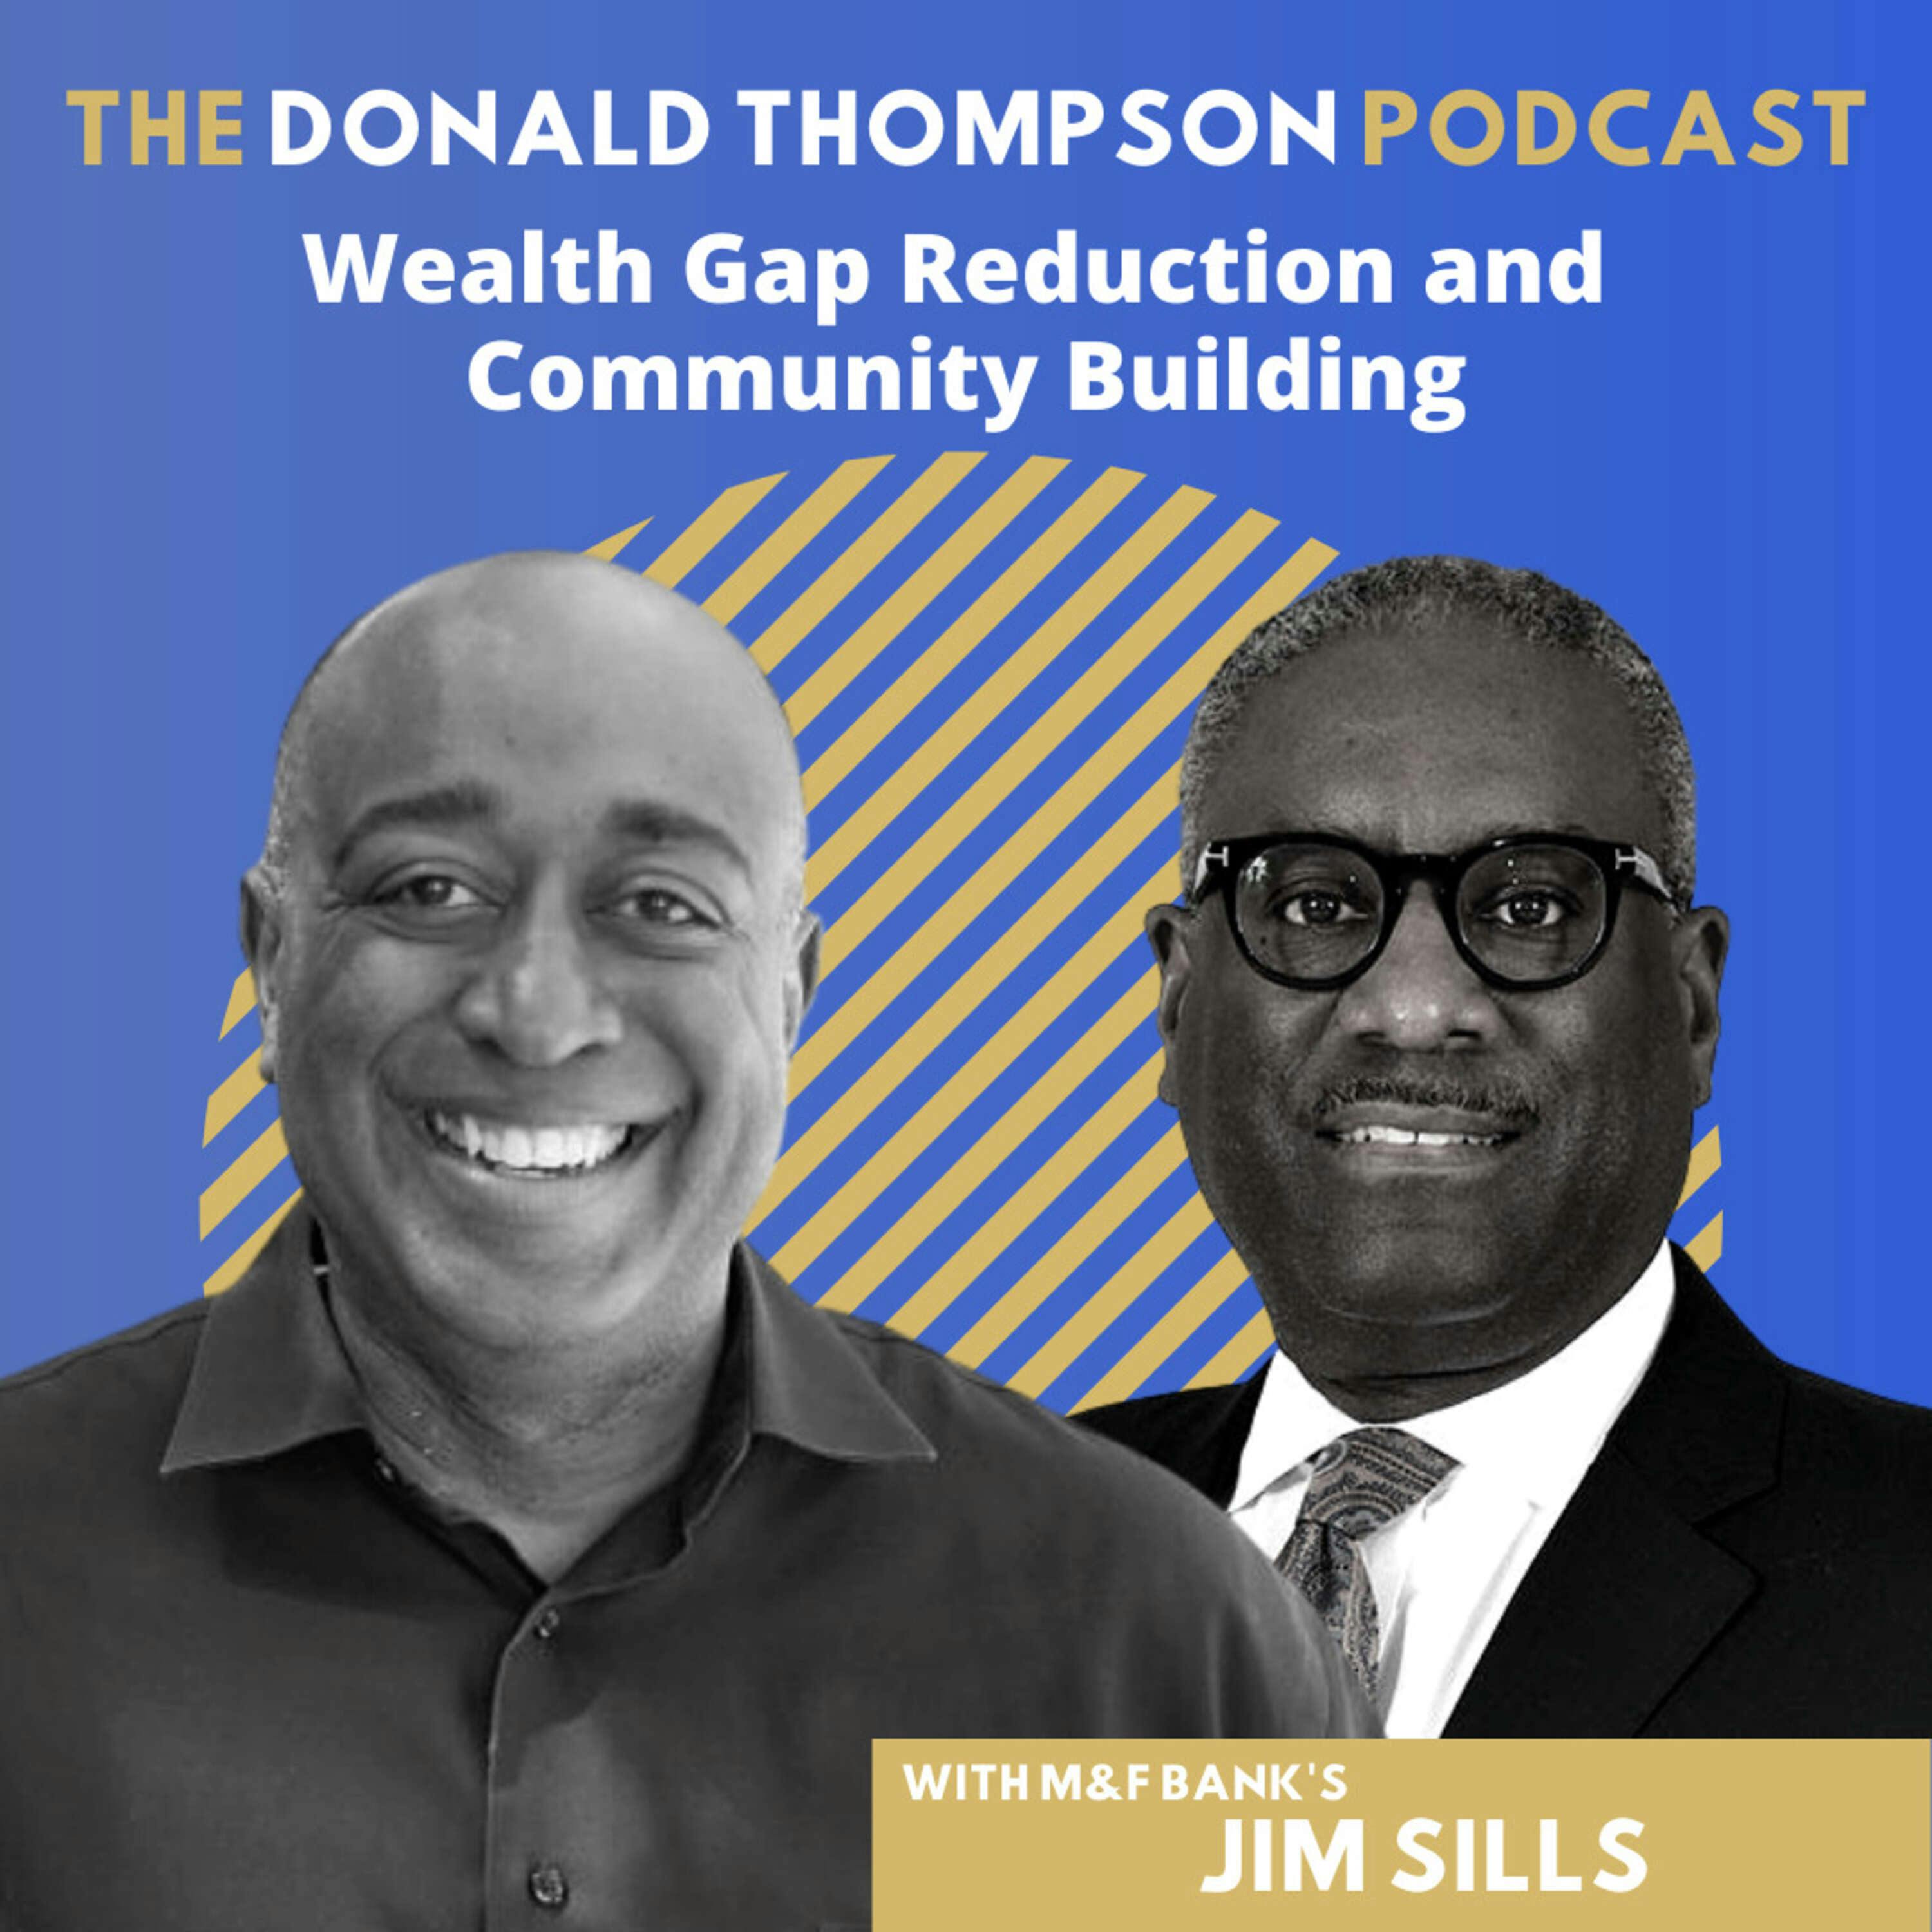 M&F Bank CEO James Sills on Wealth Gap Reduction and Community Building